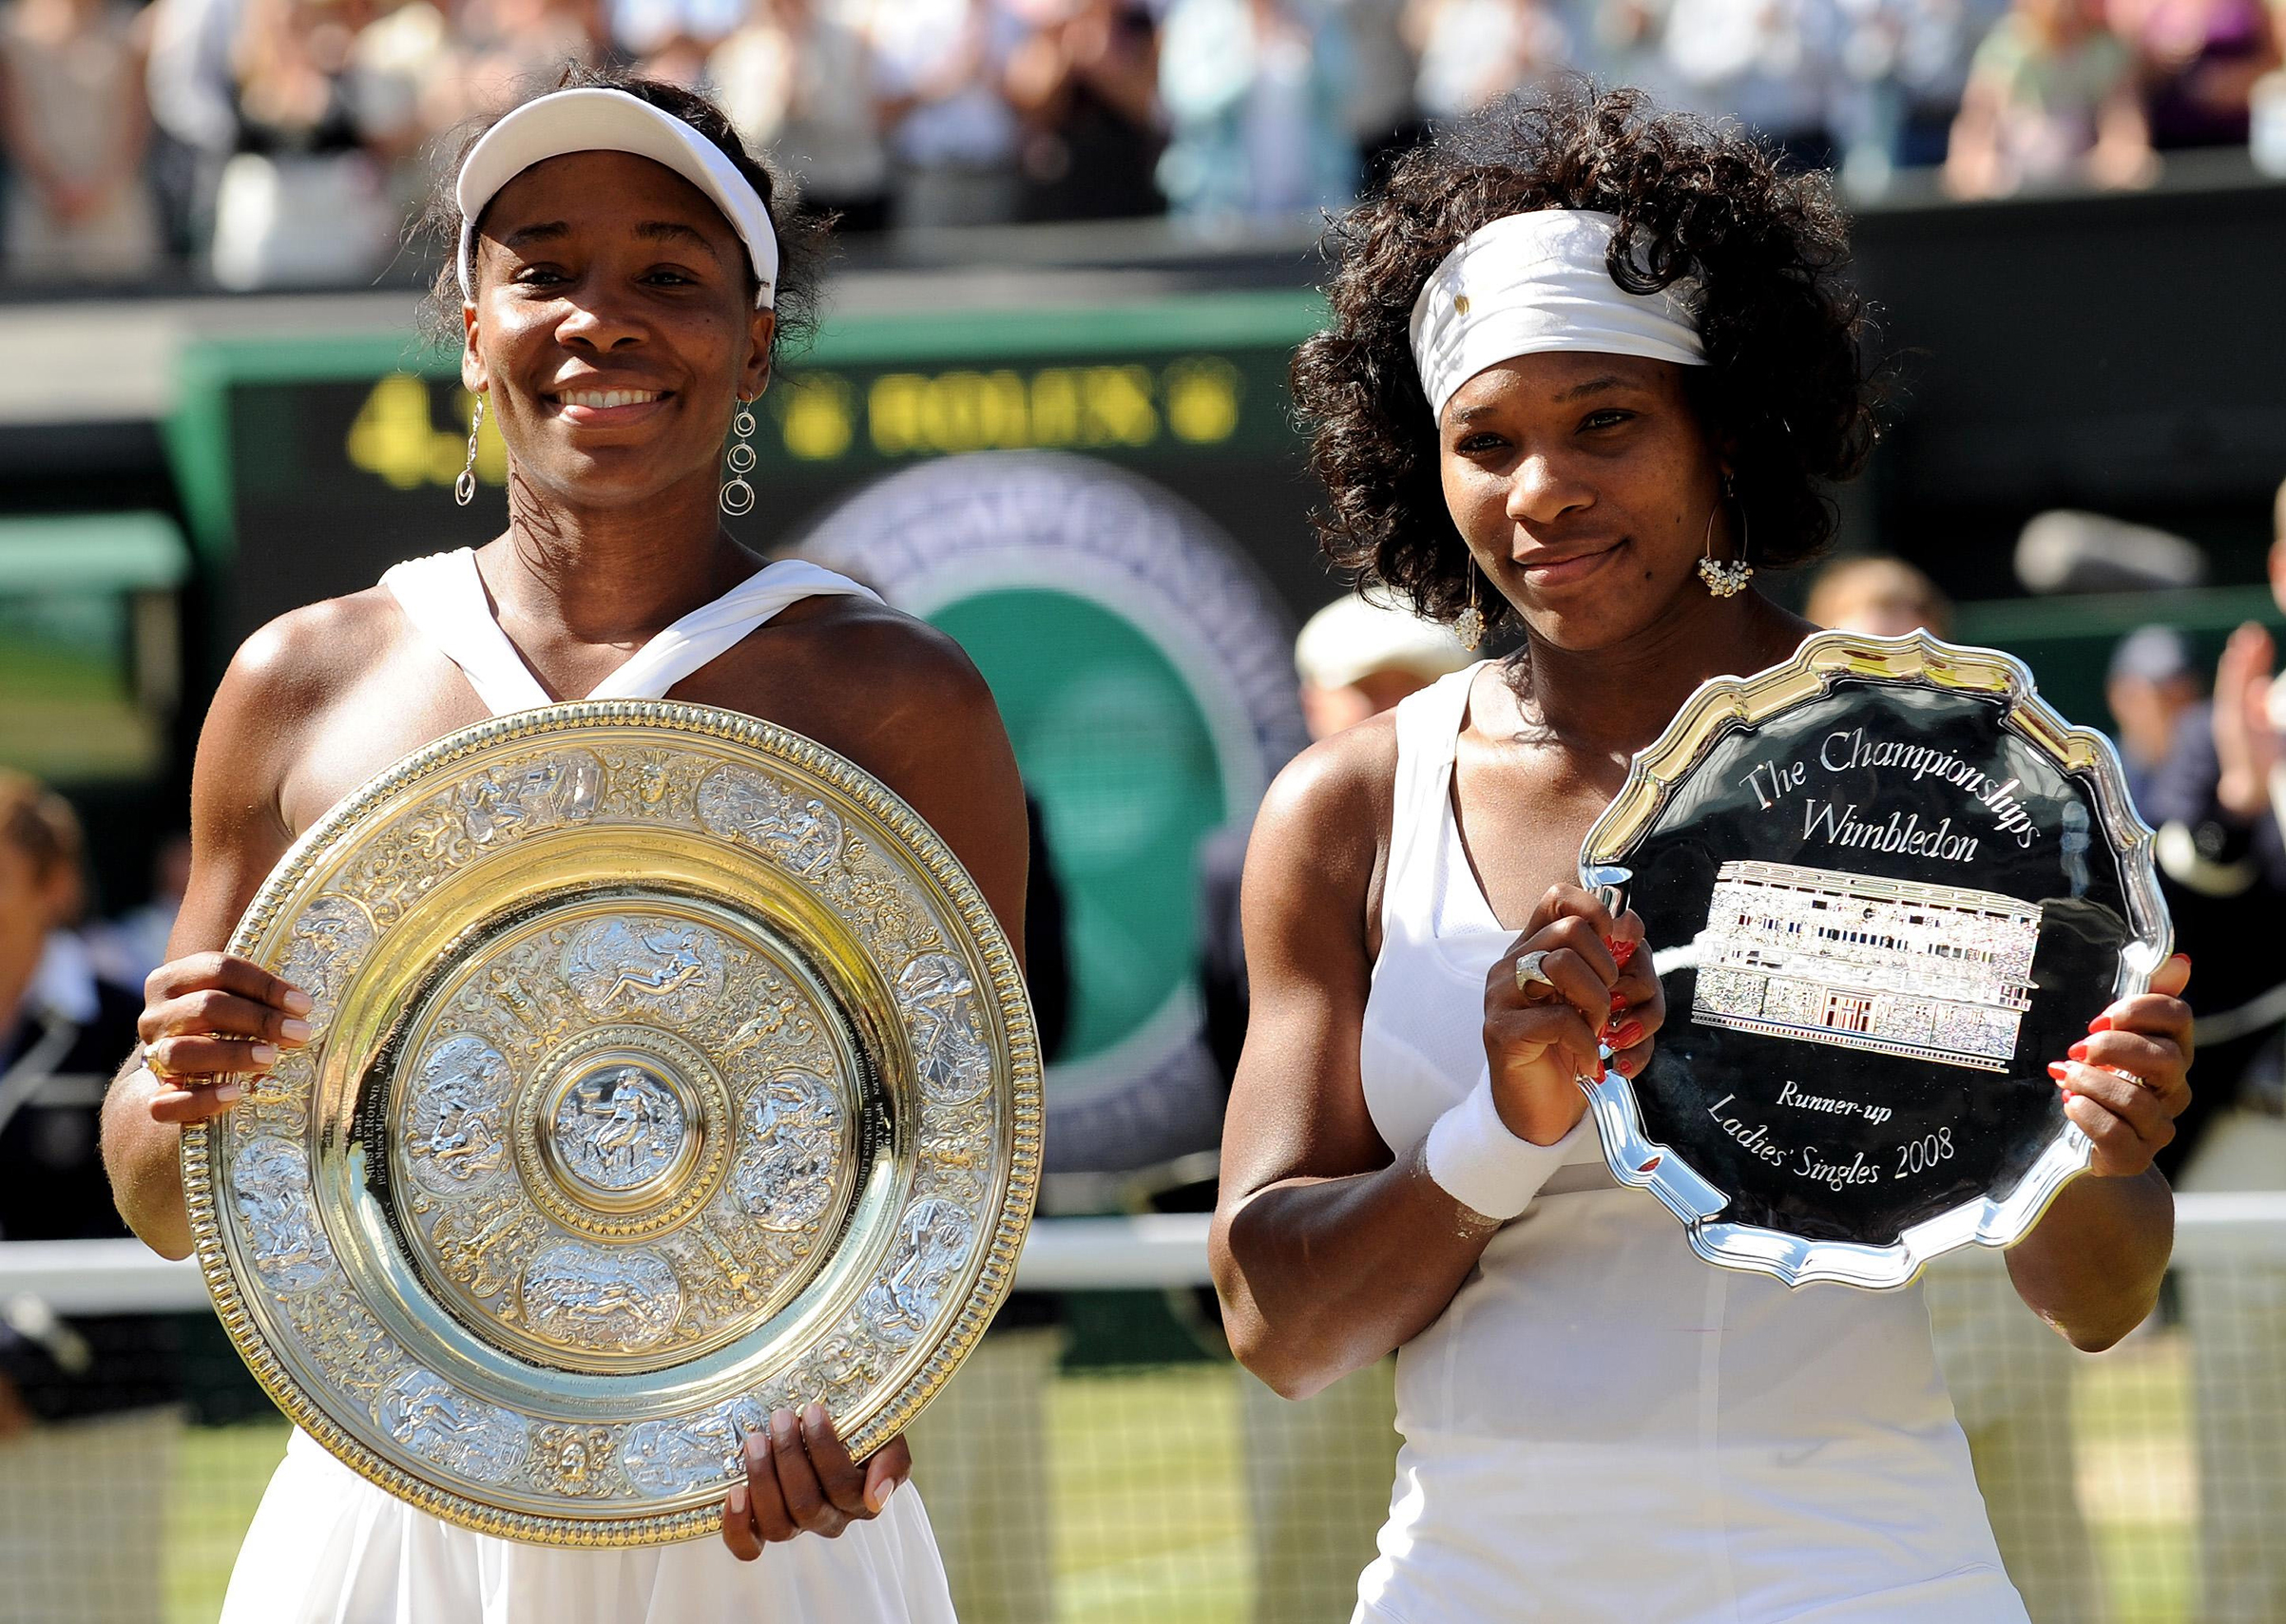 USA's Venus Williams and USA's Serena Williams with their trophies following their Women's Final match during the Wimbledon Championships 2008 at the All England Tennis Club in Wimbledon. (Fiona Hanson—PA Images/Getty Images)